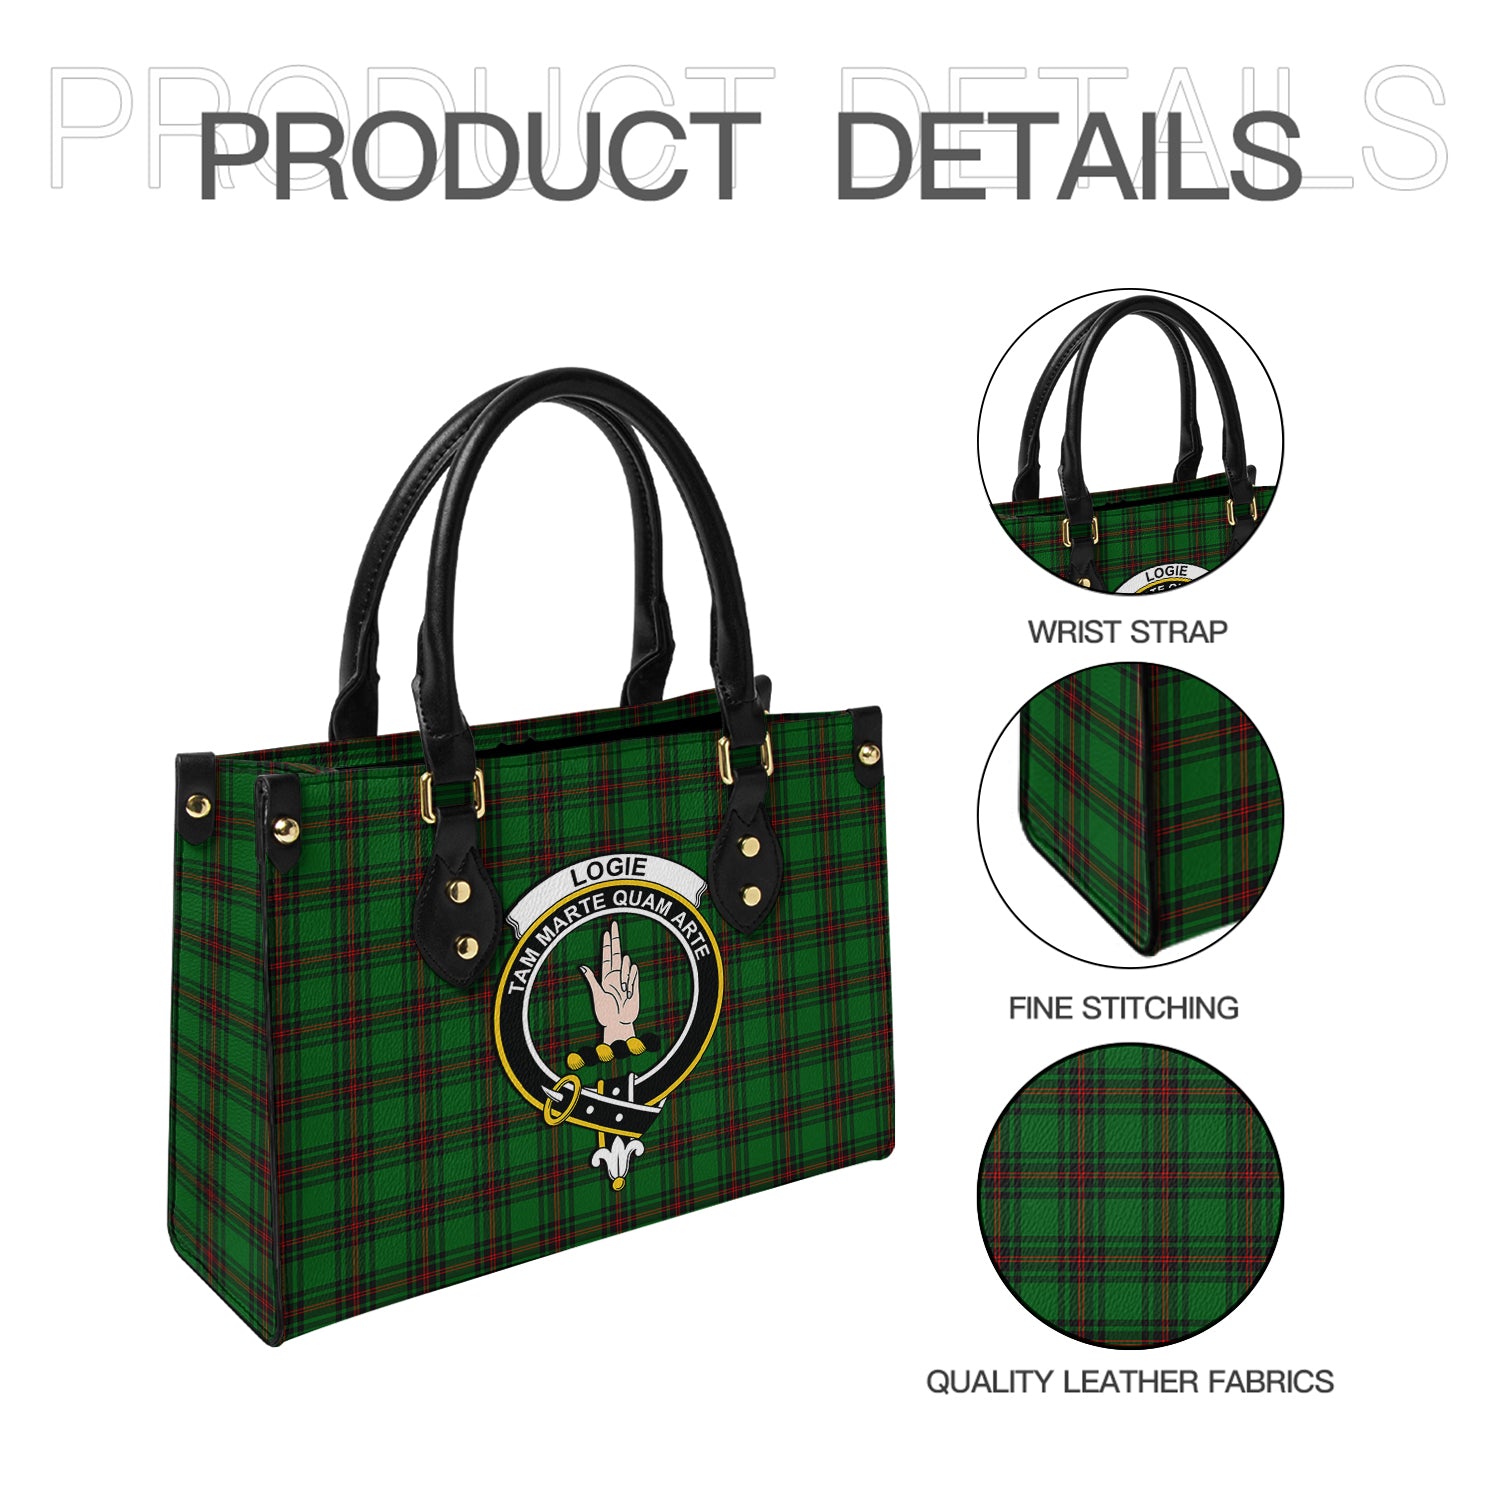 logie-tartan-leather-bag-with-family-crest